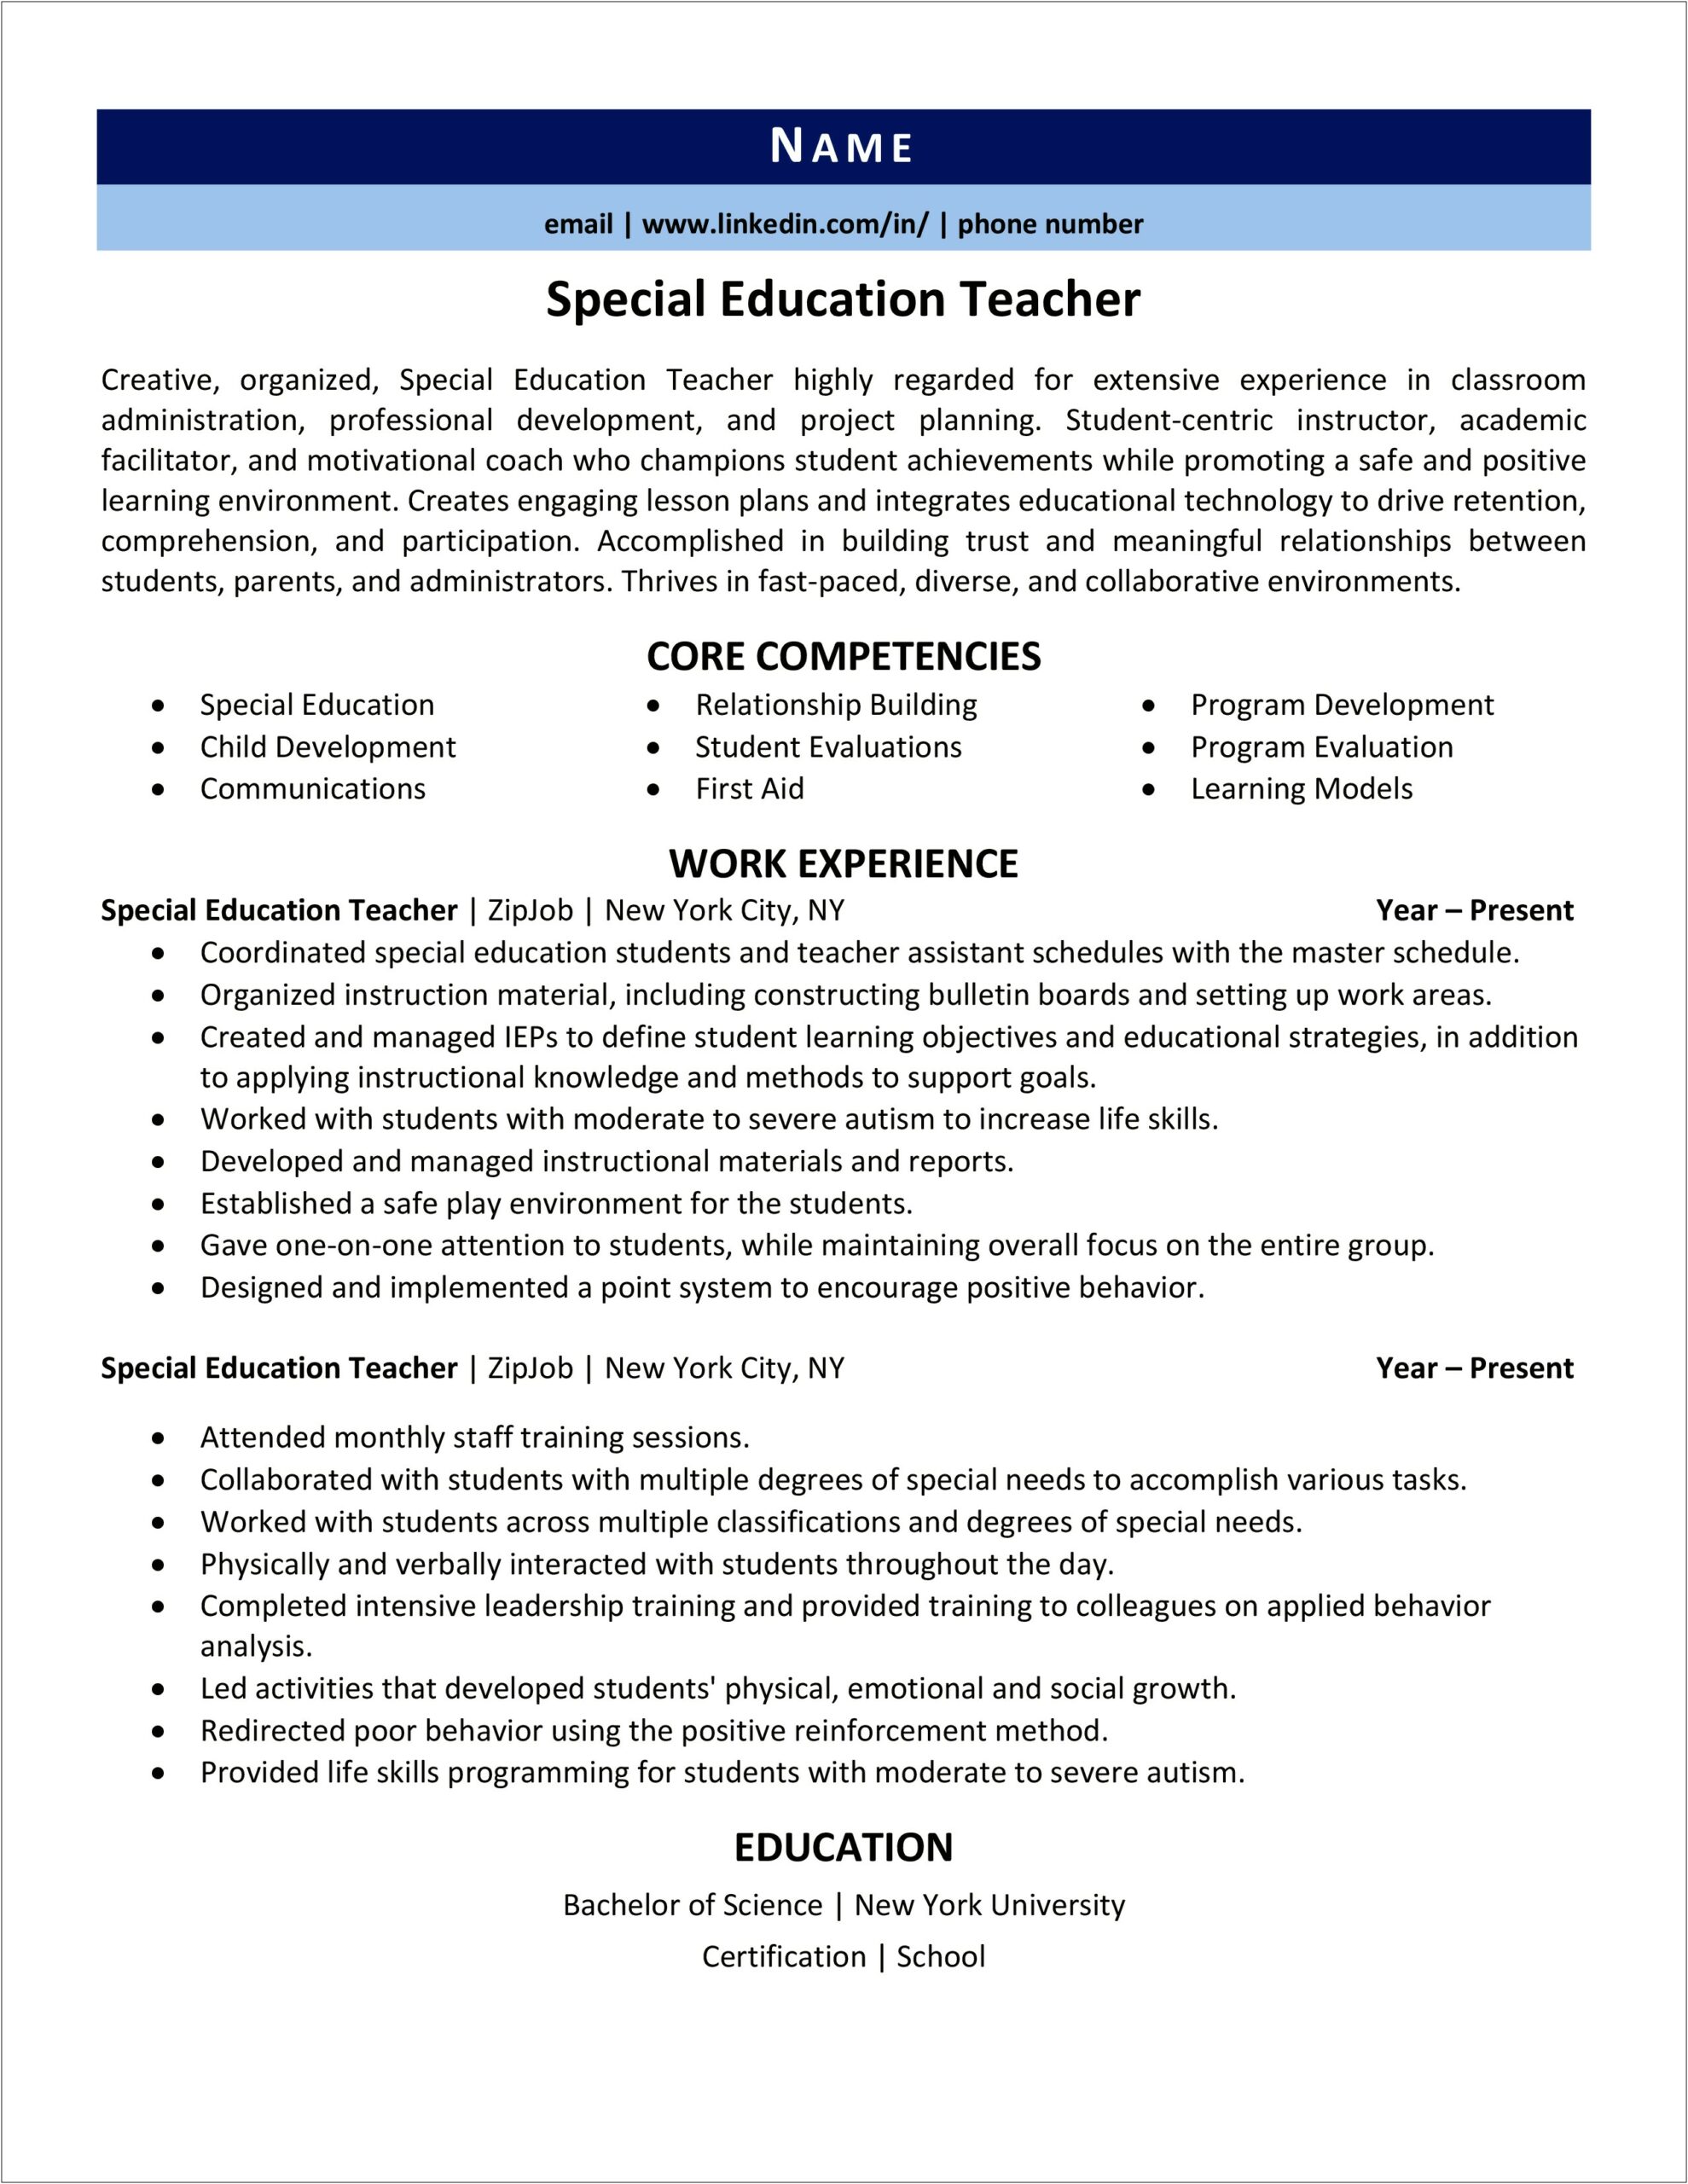 Skills Section Of Resume For Special Education Teachers